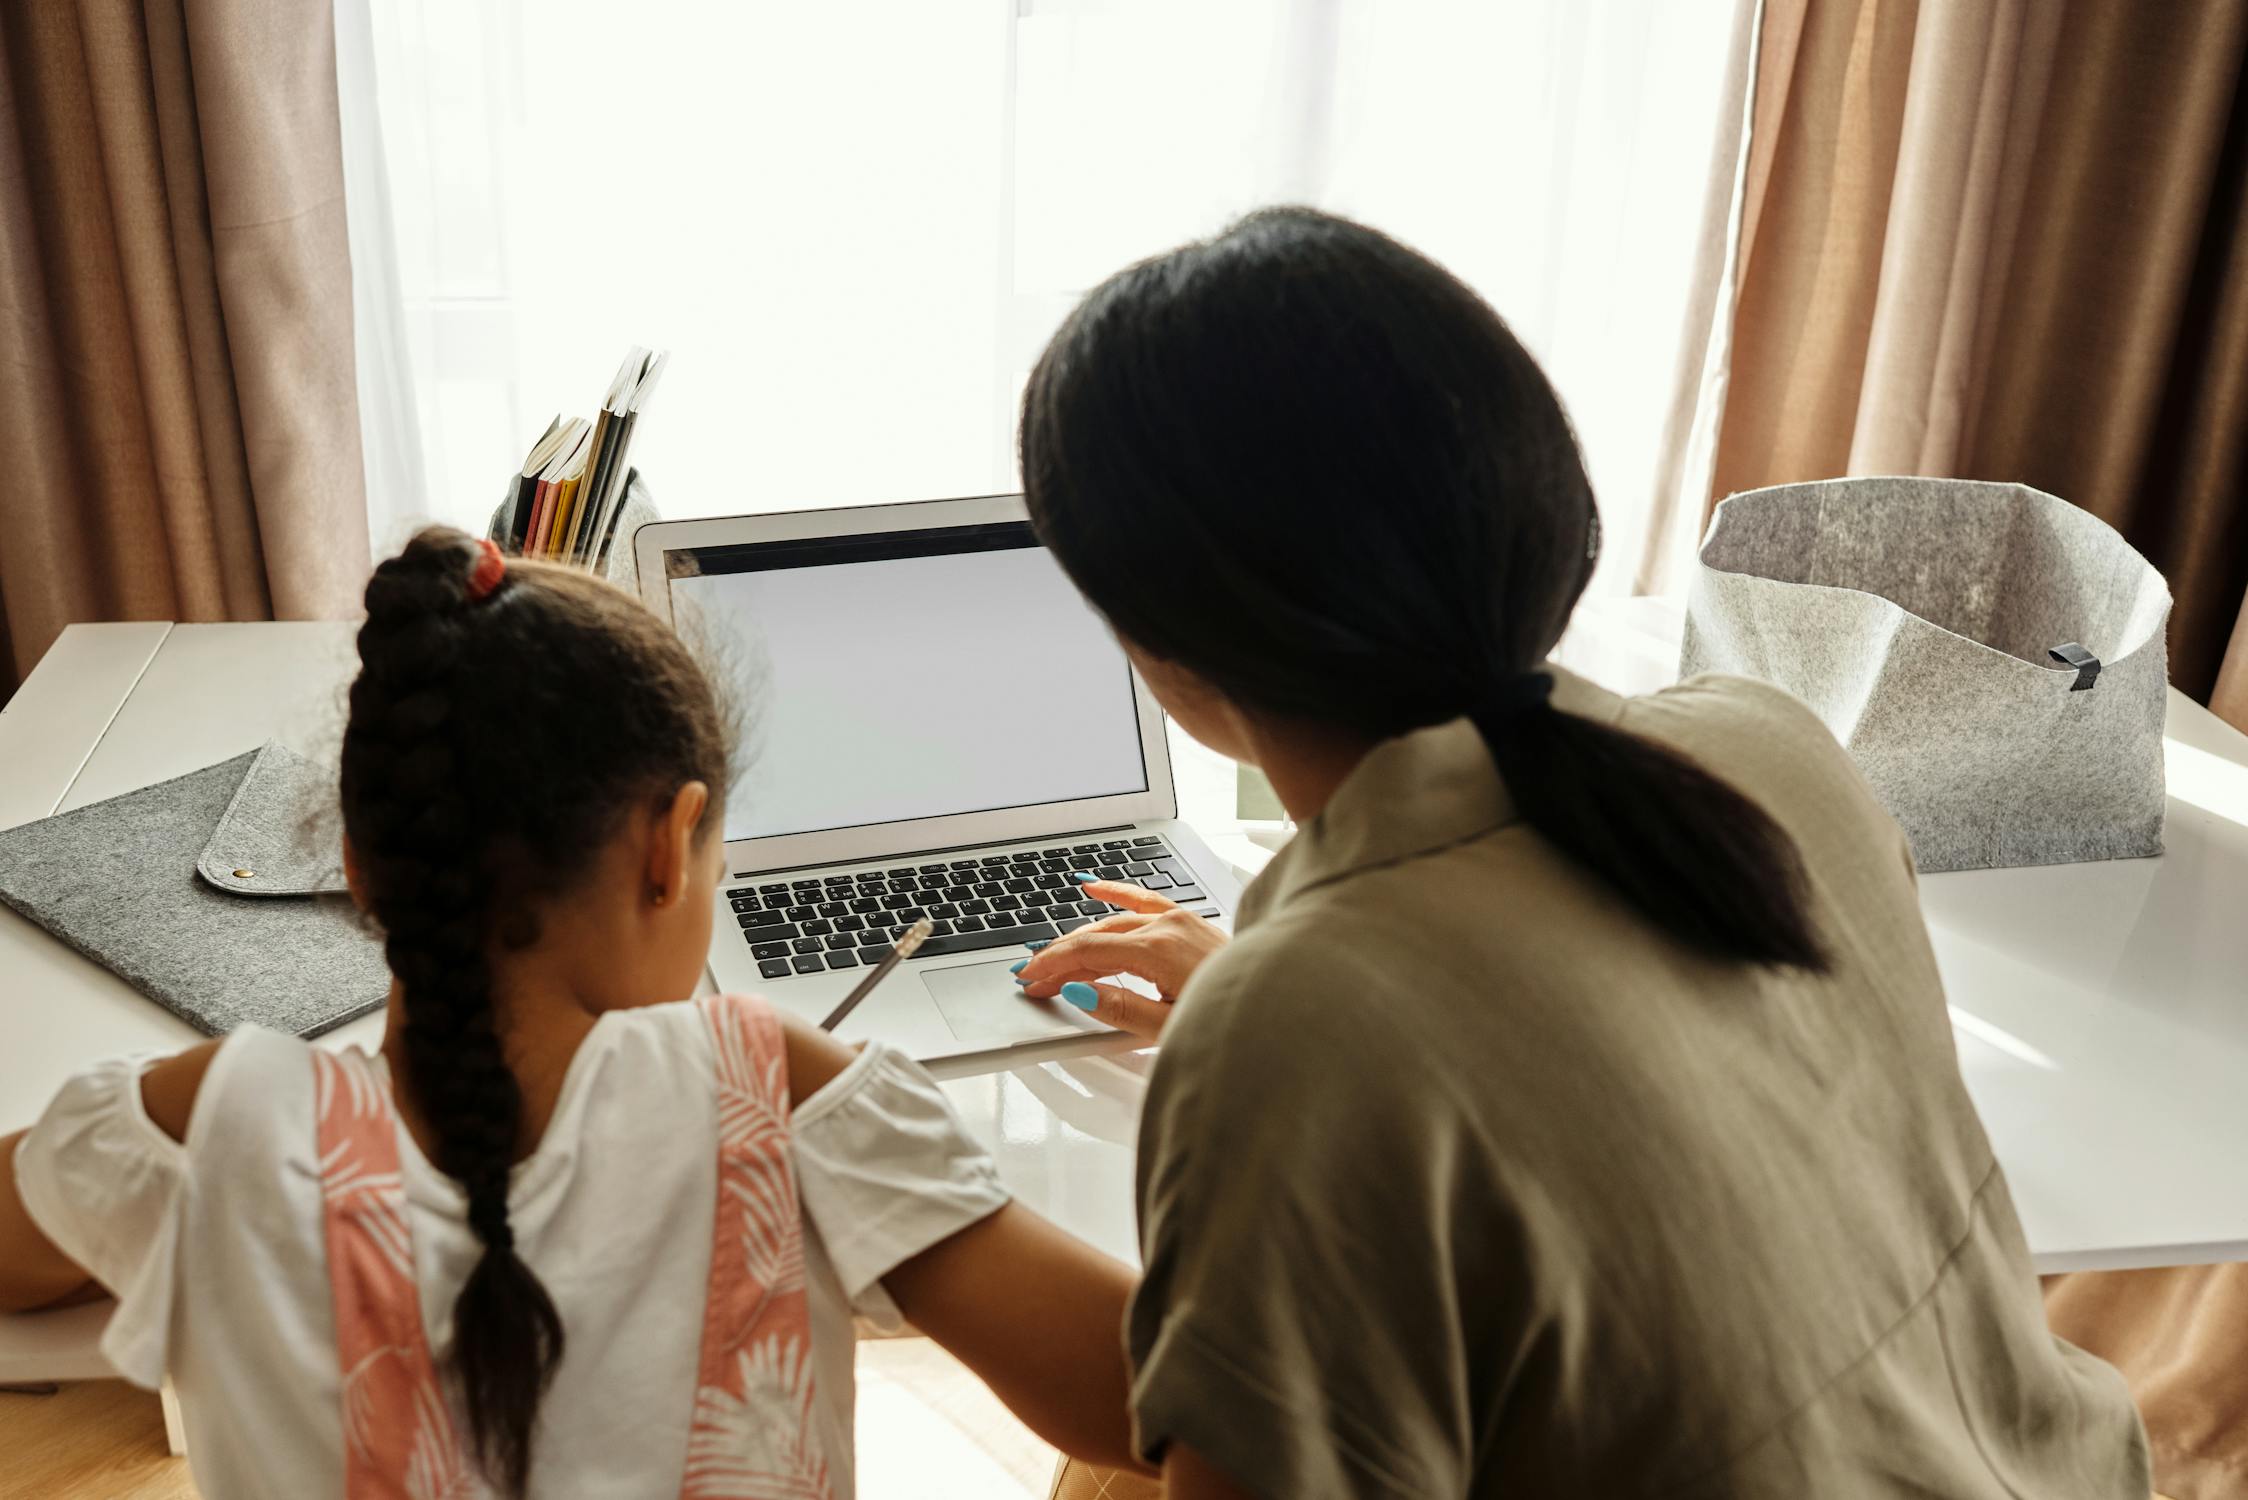 Kid with Mom Photo by August de Richelieu from Pexels: https://www.pexels.com/photo/mother-helping-her-daughter-with-homework-4260475/